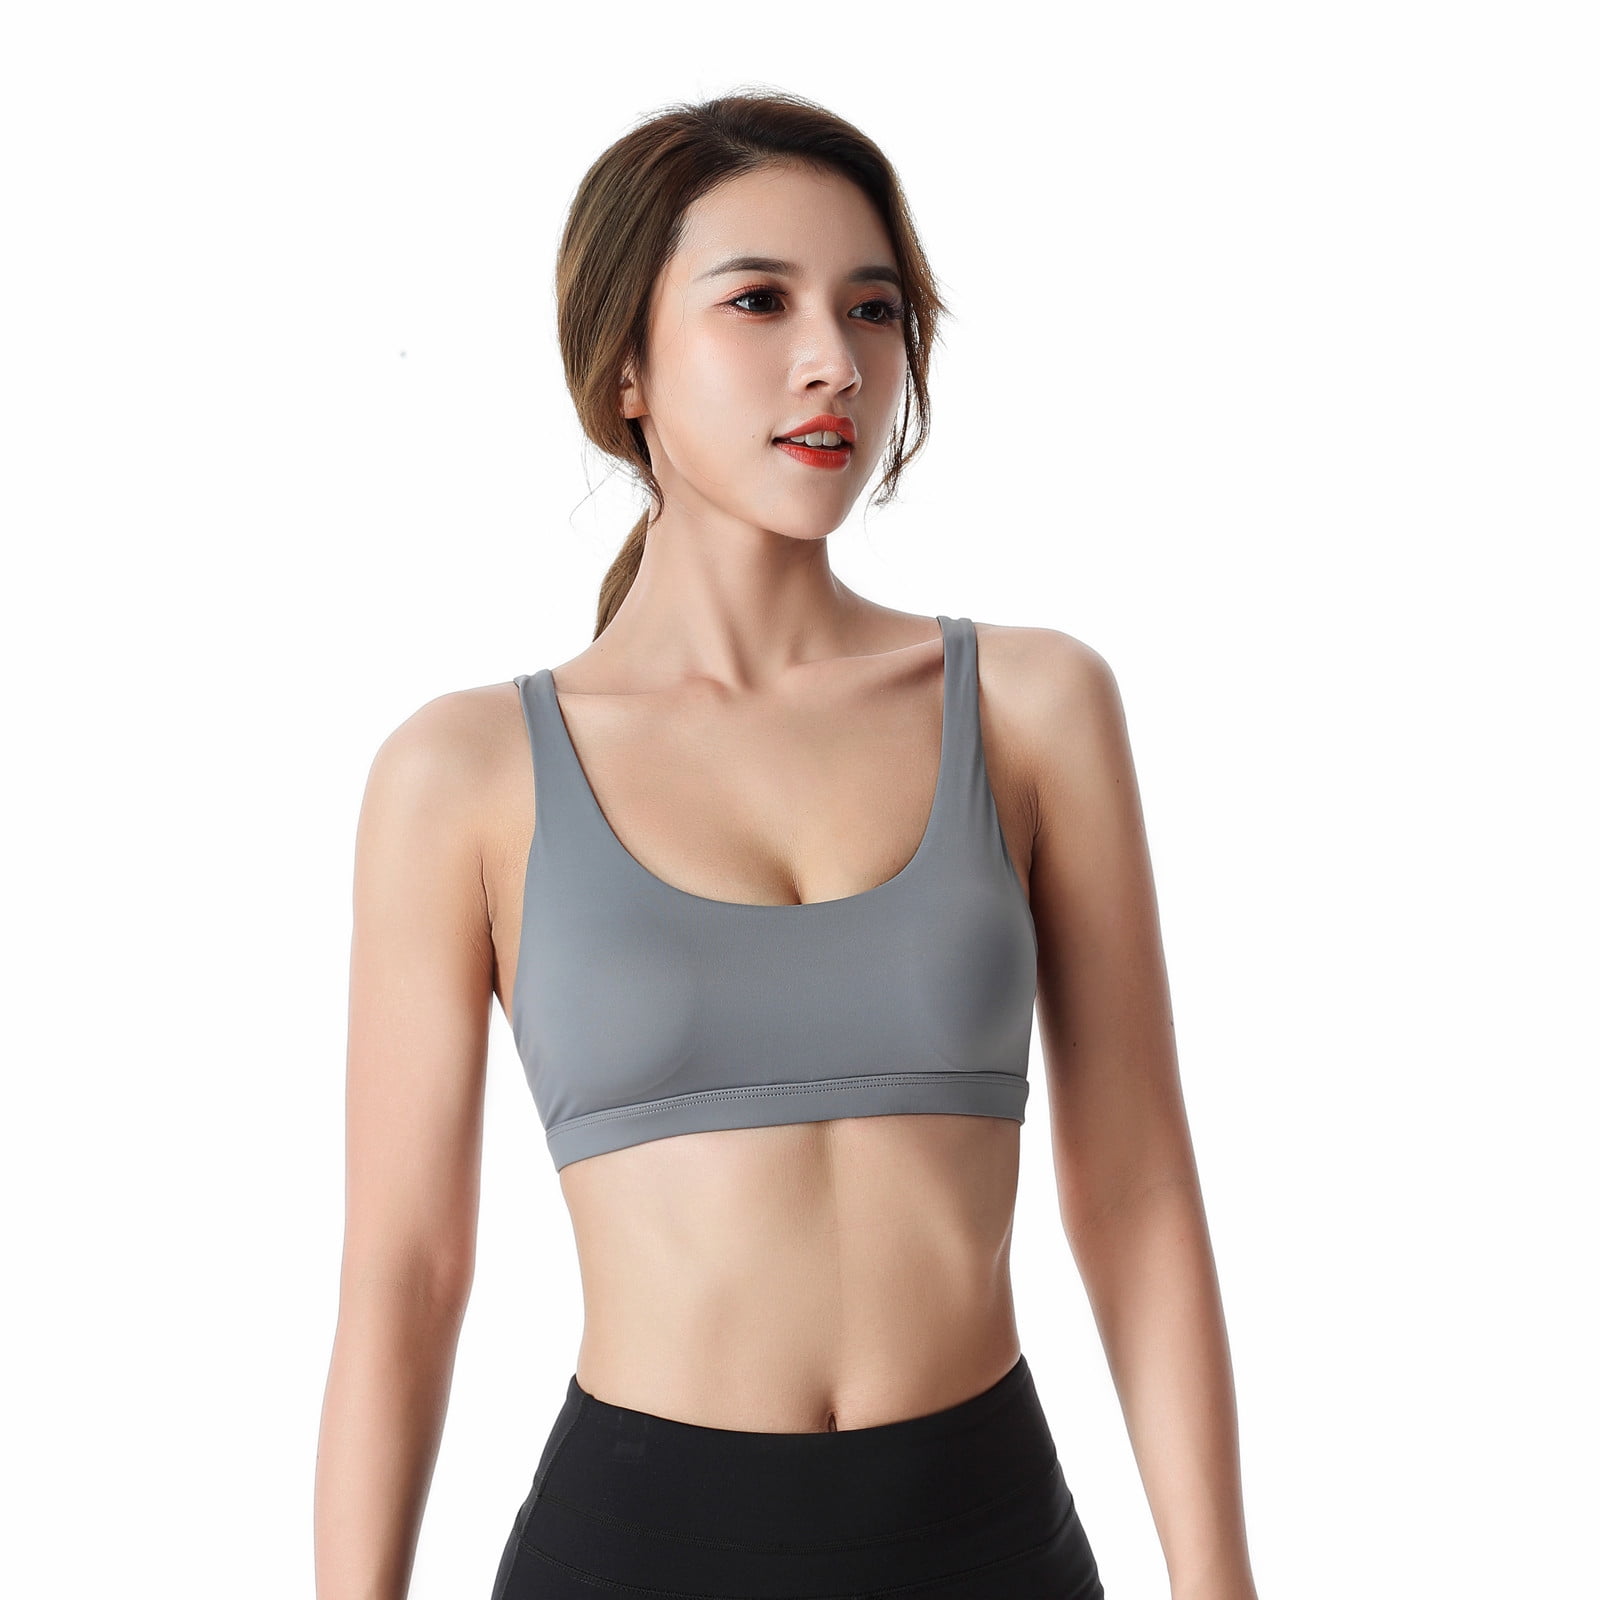 Spring Savings Clearance Items Home Deals! Zeceouar Sports Bras For Women  Woman Bras With String Quick Dry Shockproof Running Fitness Large Size  Underwear 